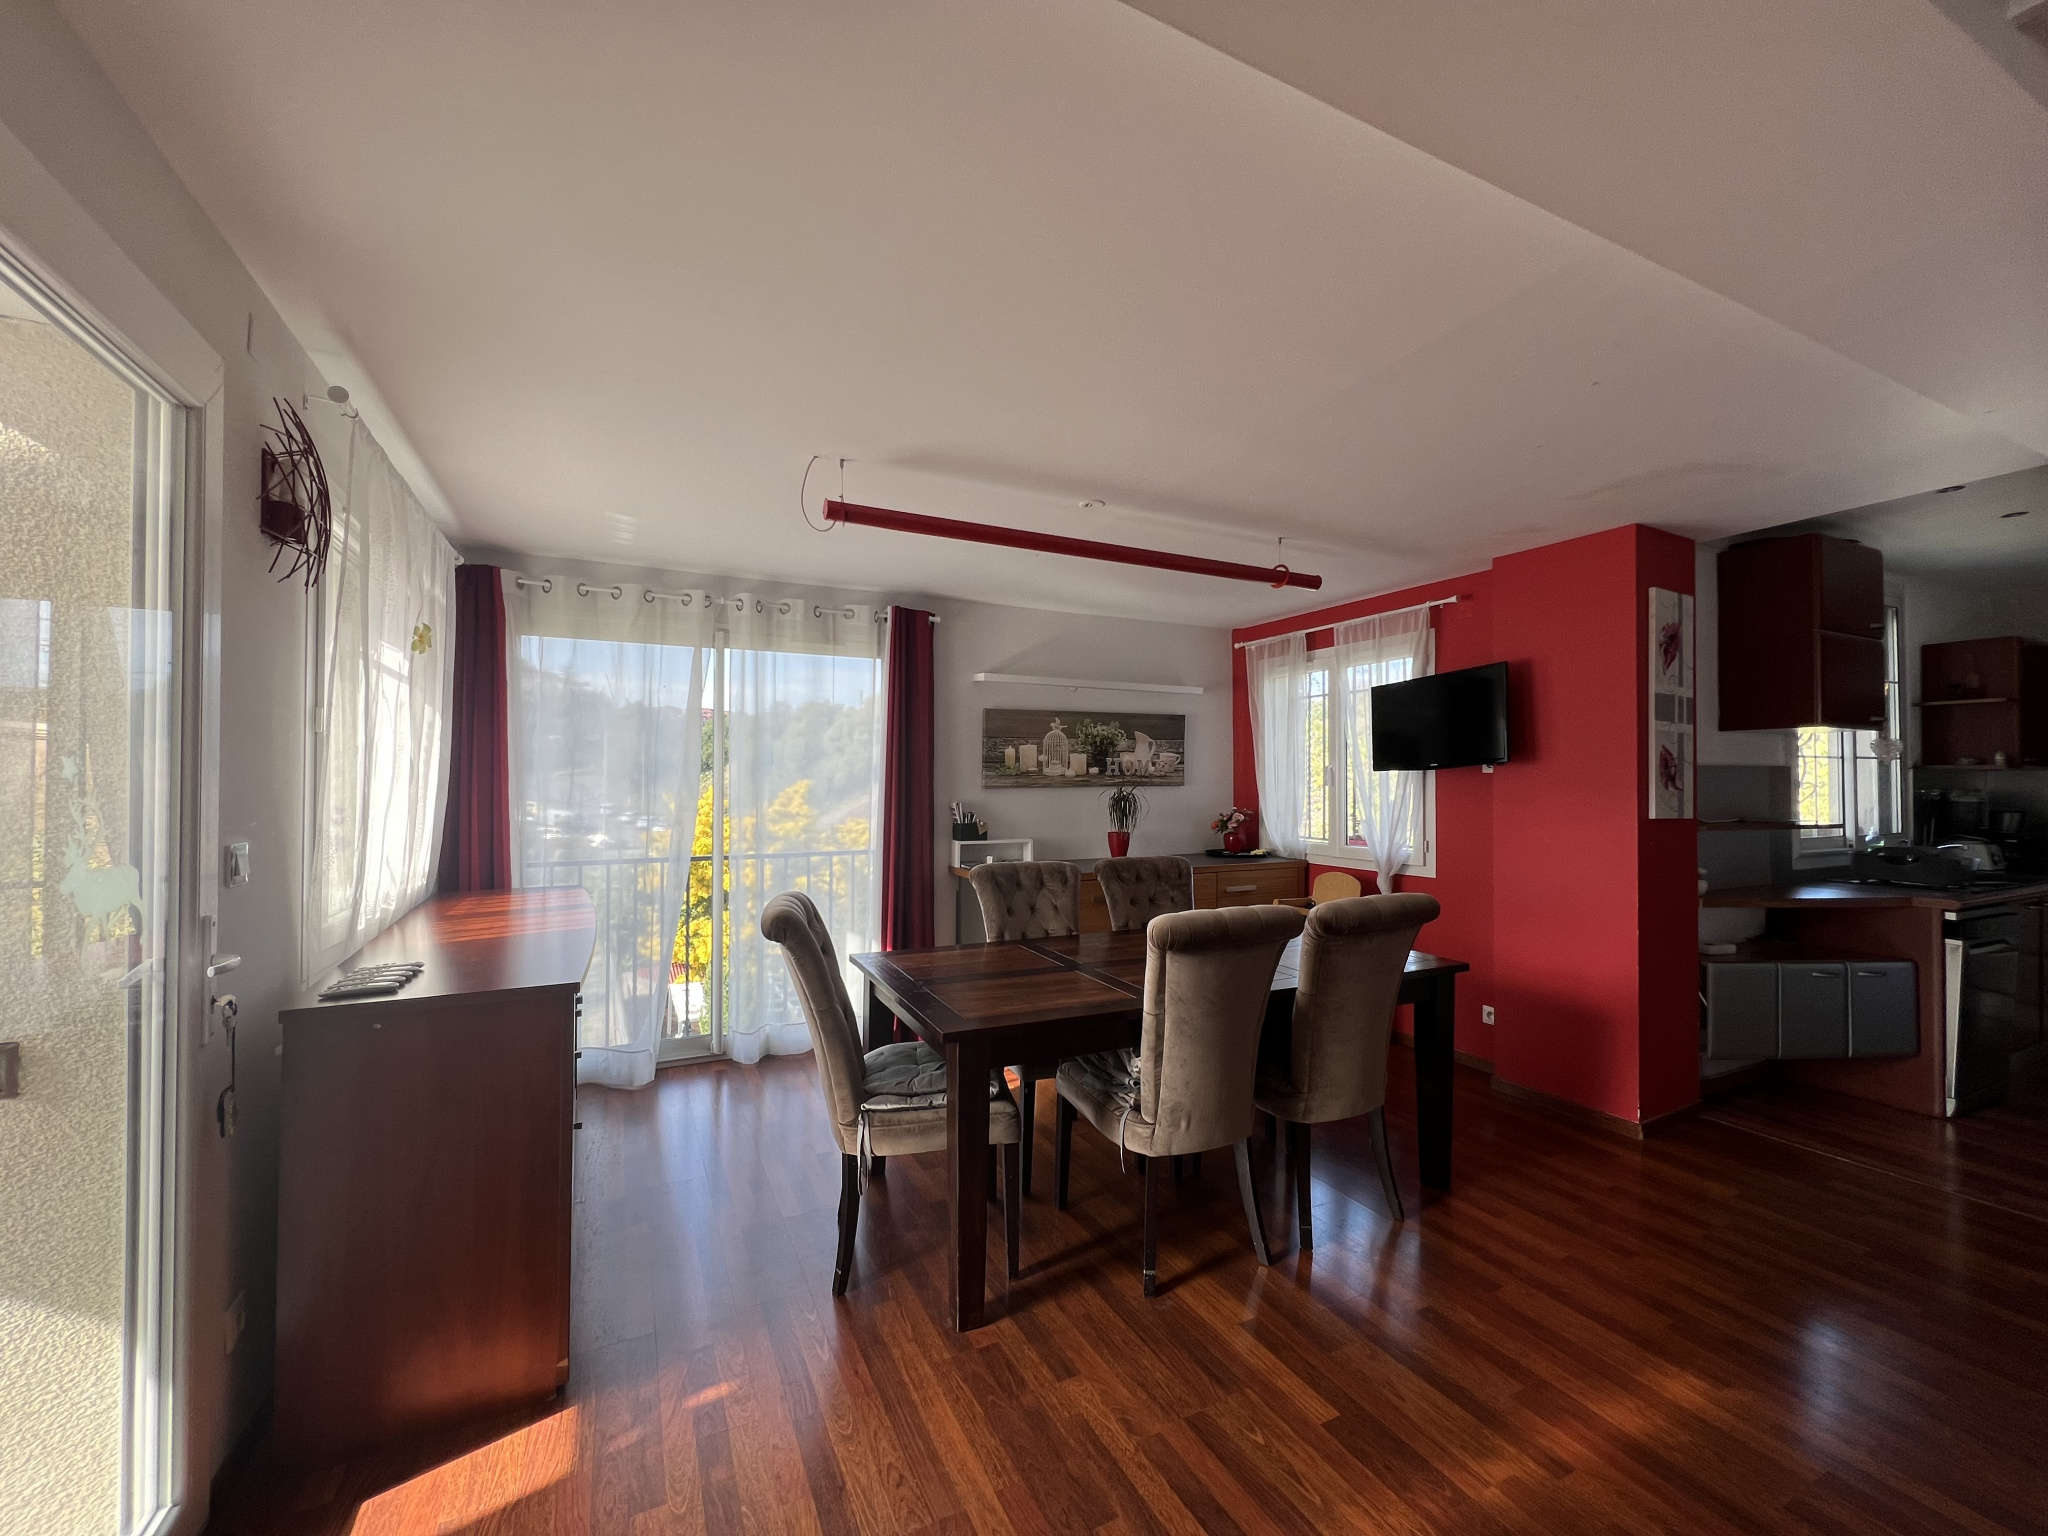 Collioure very large 4 bedroom apartment with large garden 5 minutes walk from the beach and shops